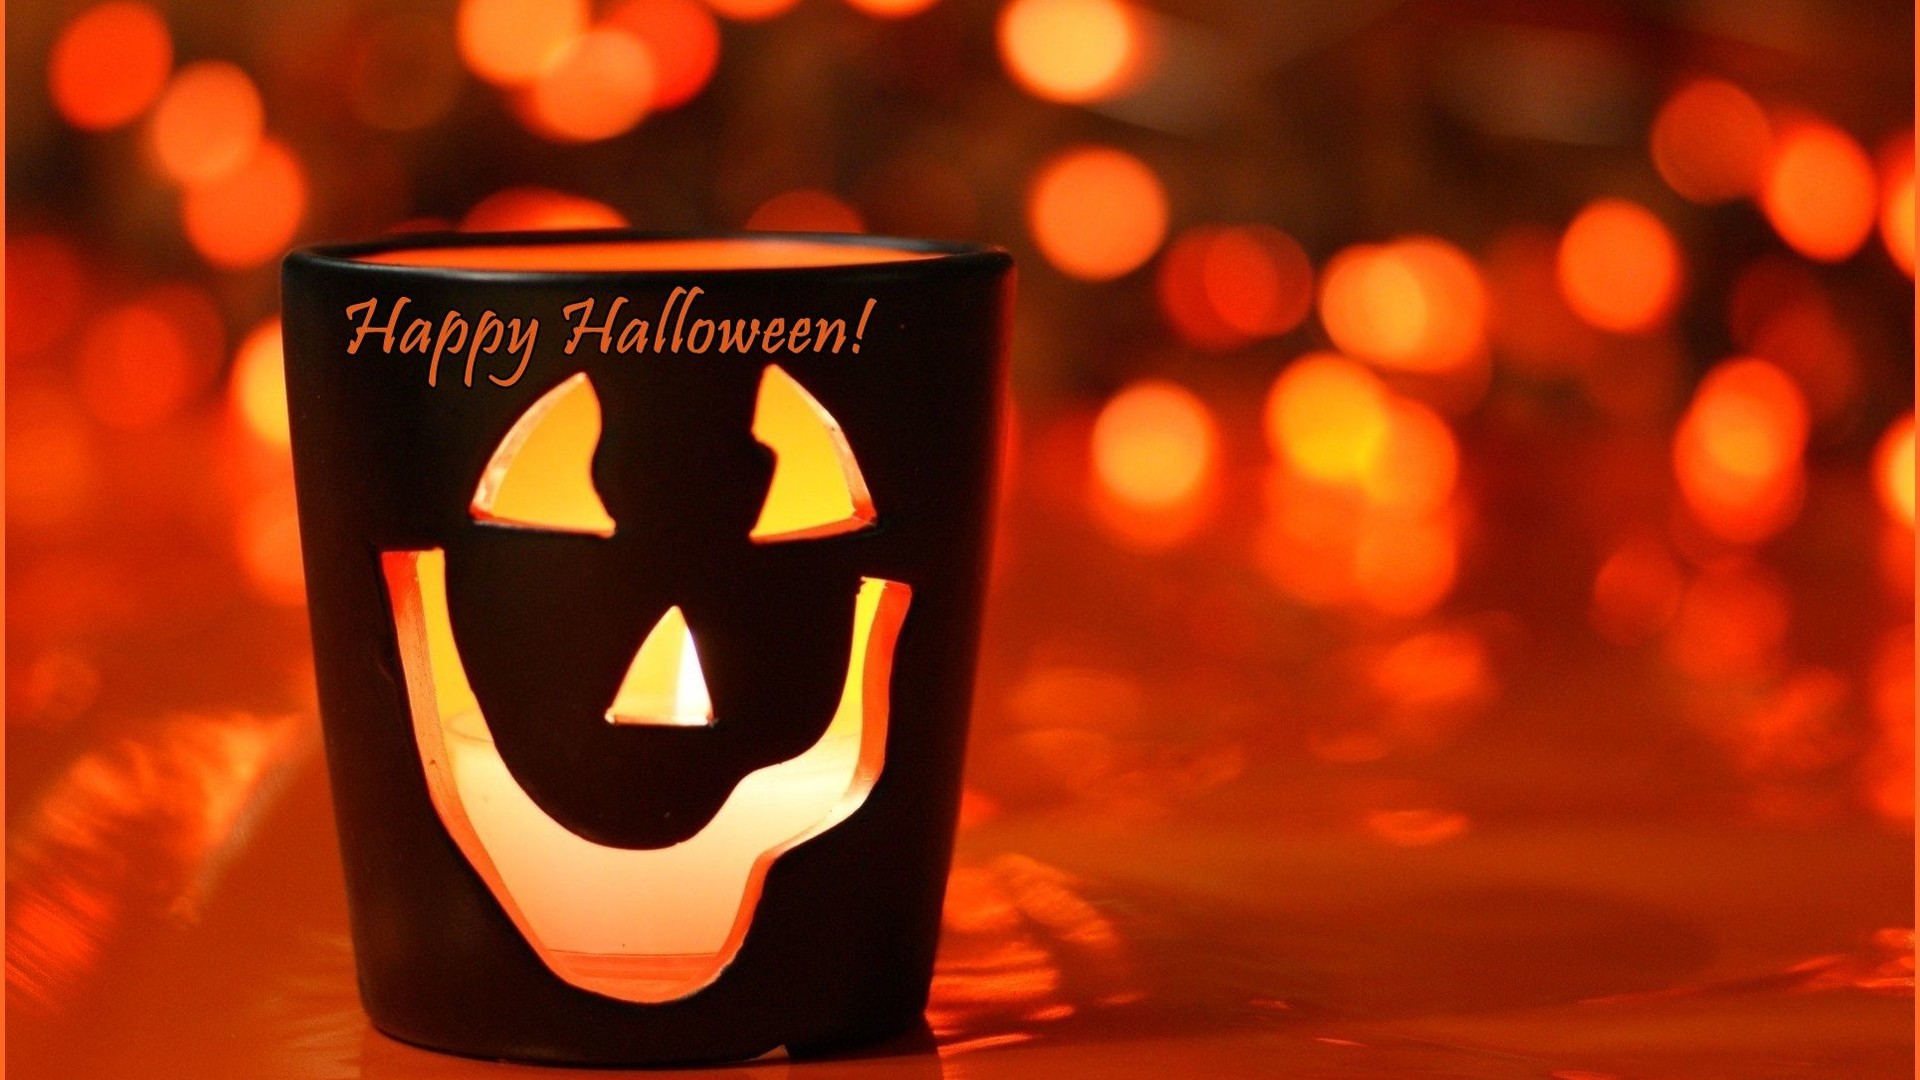 Free download Happy Halloween candle HD orange wallpaper [1920x1080] for your Desktop, Mobile & Tablet. Explore Halloween Orange Wallpaper. Halloween Orange Wallpaper, Orange Halloween Wallpaper, Halloween Orange And Black Wallpaper